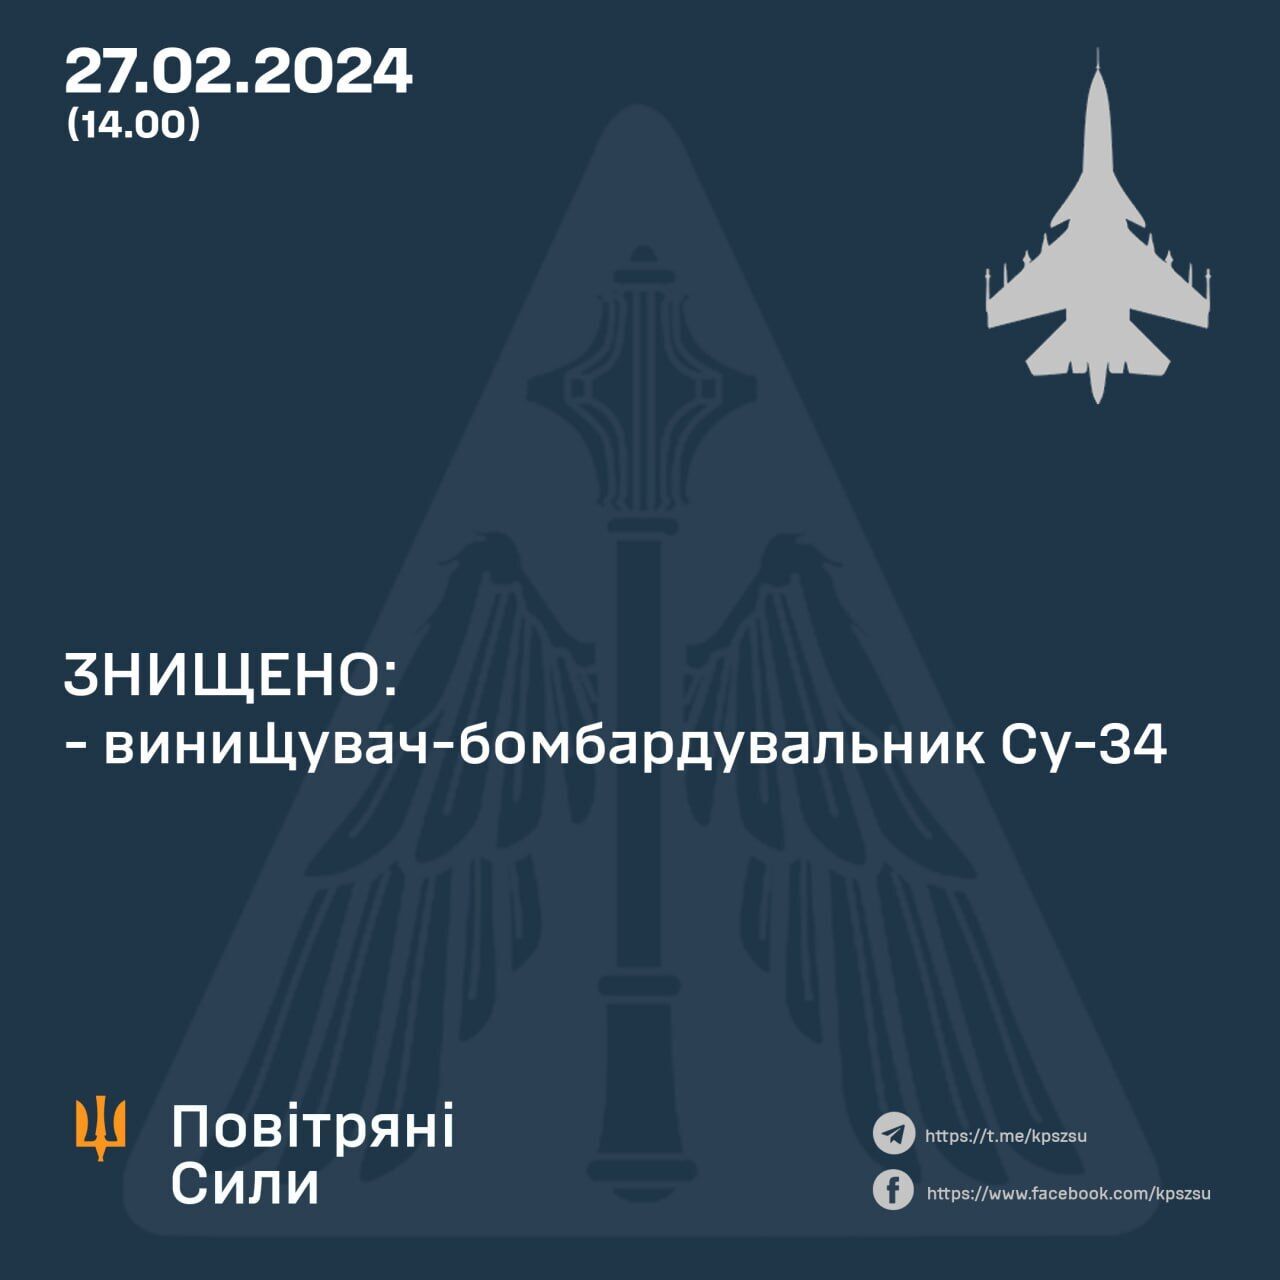 The second one in a day: The Ukrainian Air Force shot down another Russian Su-34. Photo